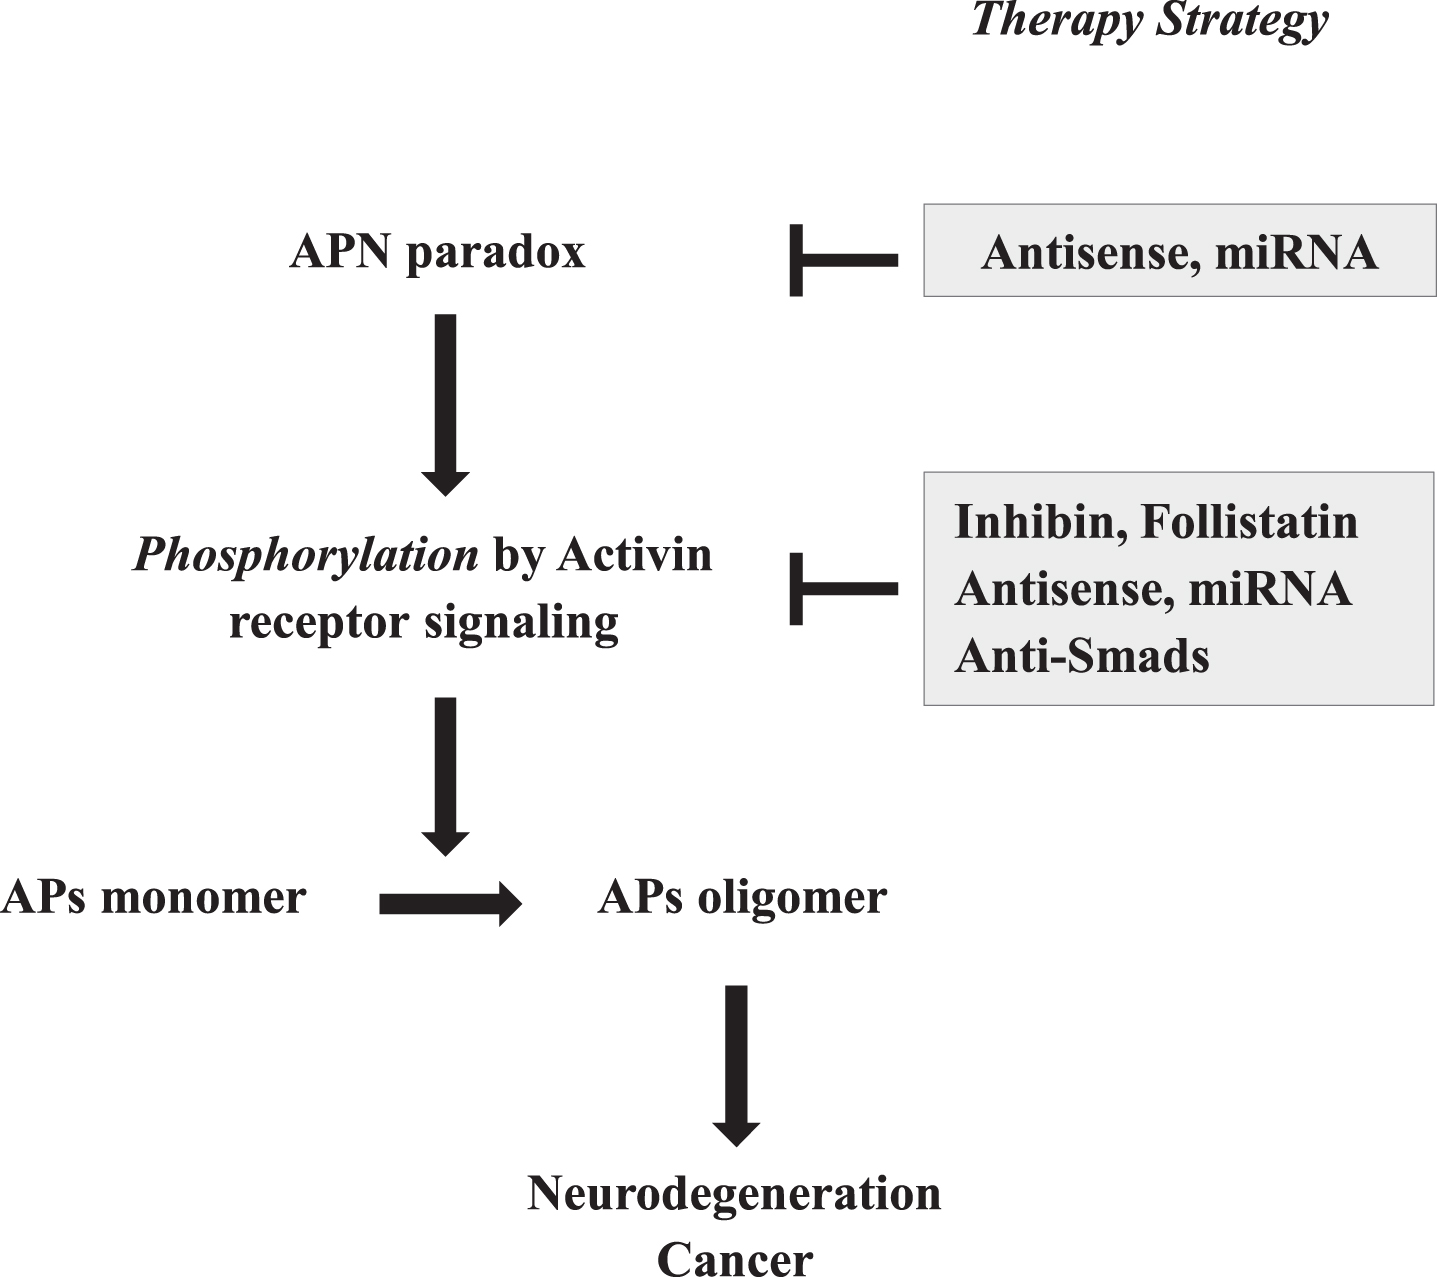 Strategic therapies for neurodegeneration based on activin-mediated antagonistic pleiotropy. Given that the oligomerization of APs is regulated by phosphorylation through the activin receptor signaling pathway, which is stimulated by APN paradox, these steps might present attractive therapeutic targets for intervention. As such, in addition to suppression of APN expression by antisense strategies, such as antisense oligonucleotides and mi-RNA of APN, activin receptor signaling might be suppressed by various methods, including antisense oligonucleotides and mi-RNA of activin, and overexpression of inhibin and follistatin, and compounds of anti-Smads.